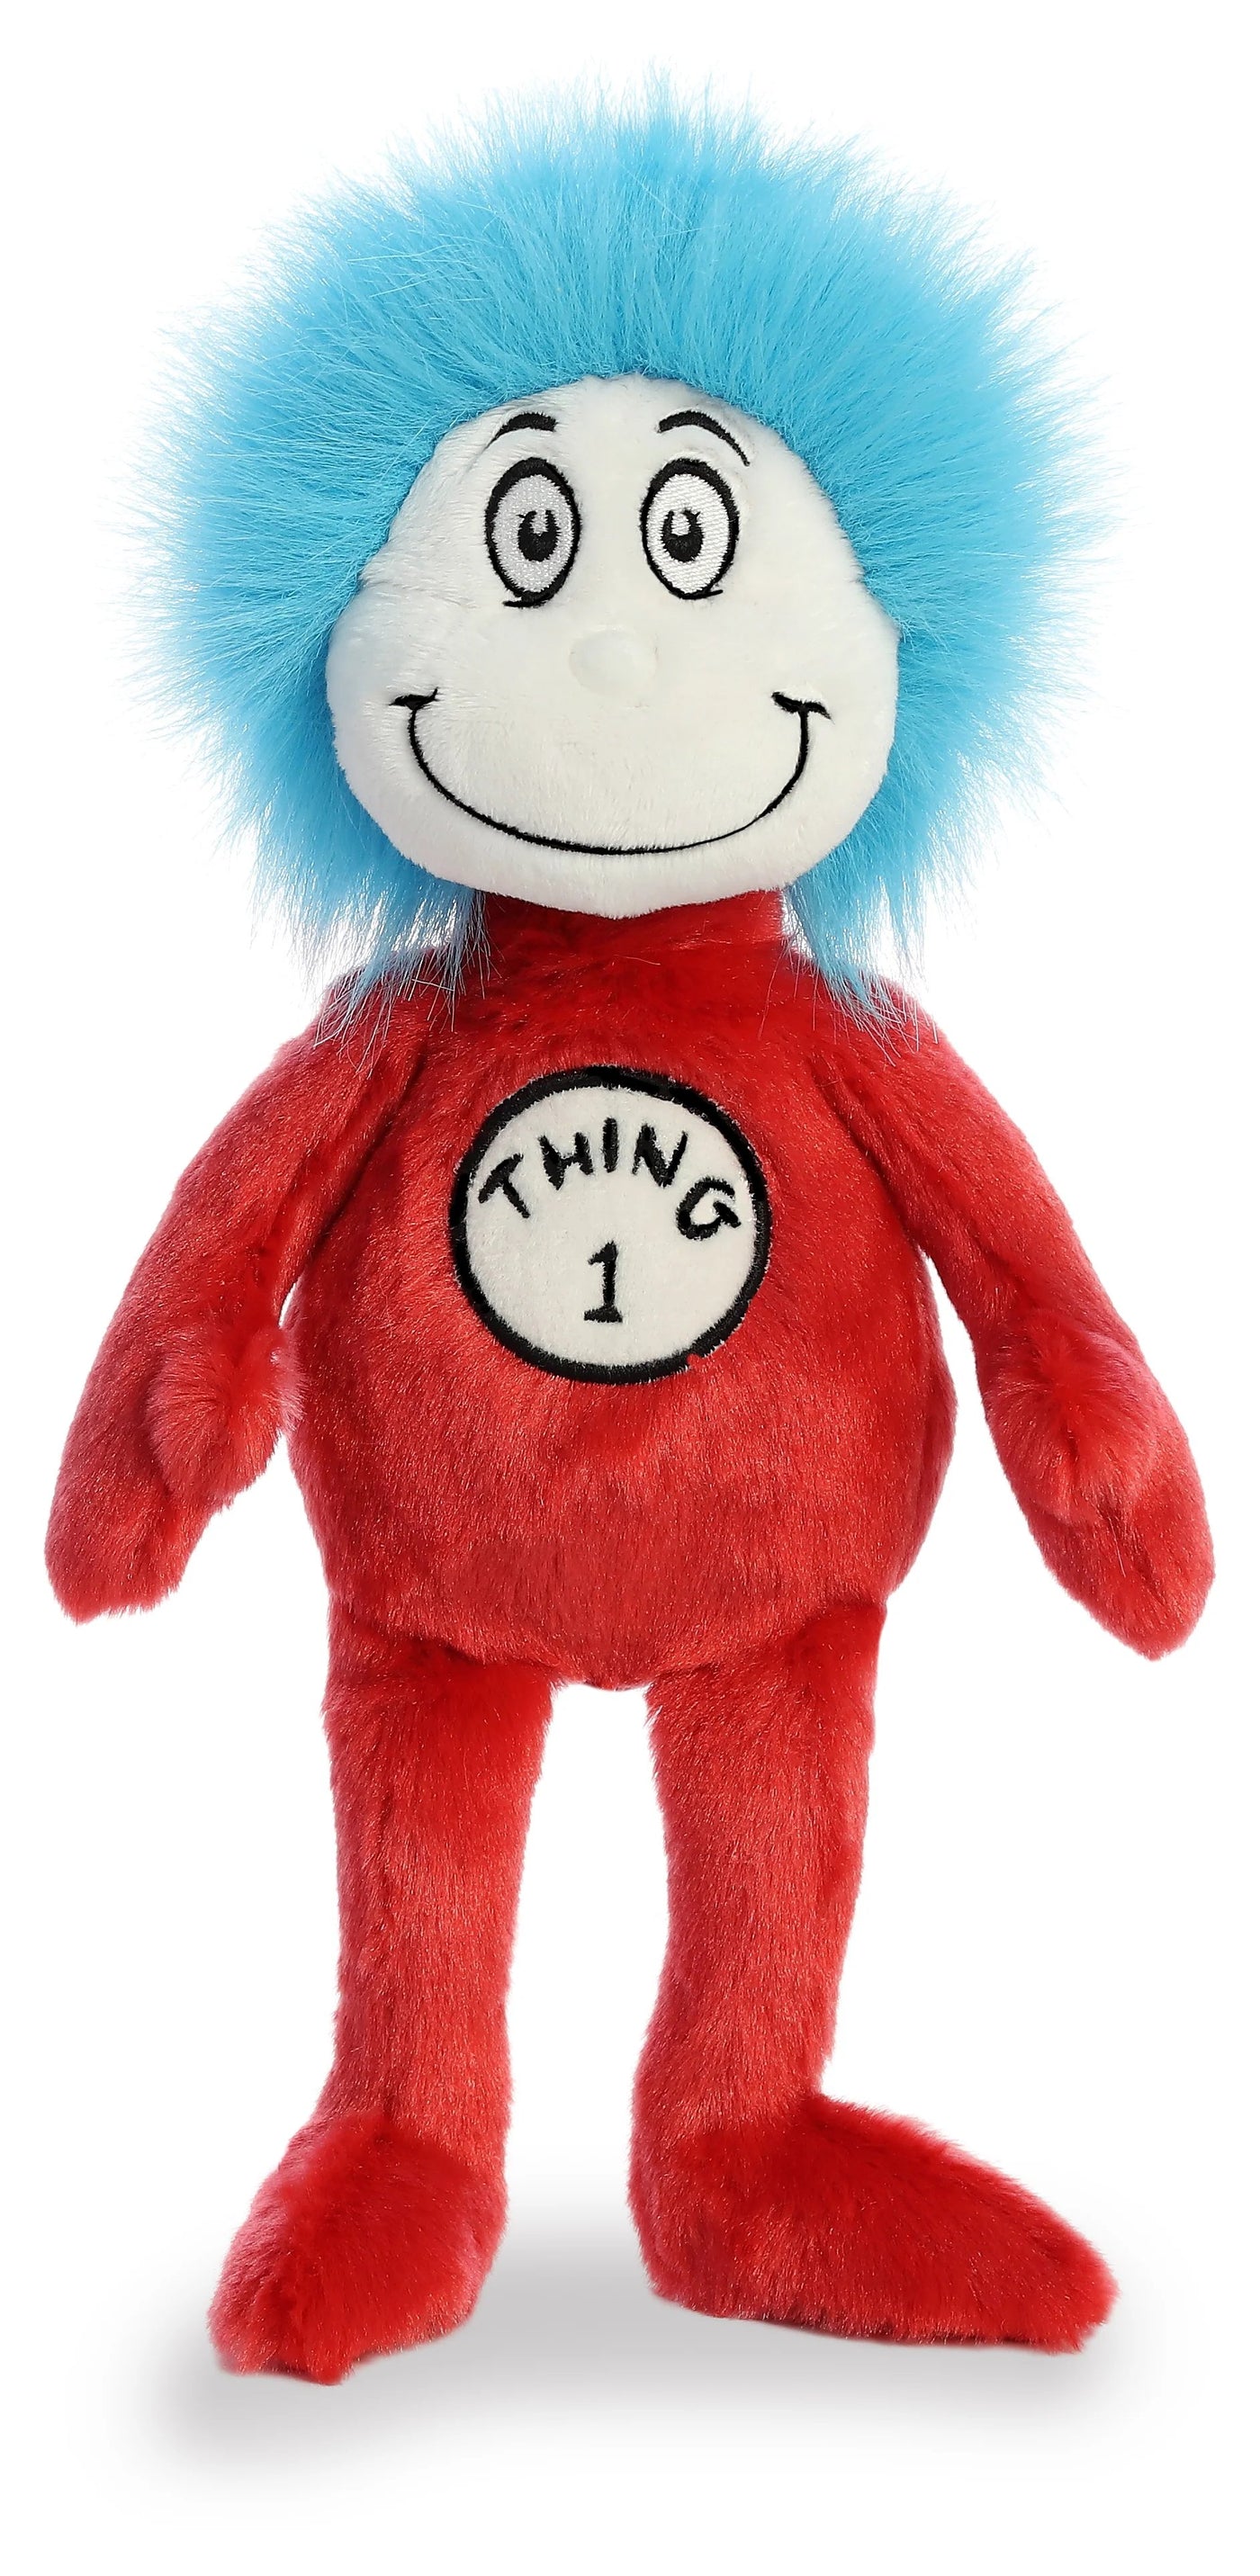 Aurora Dr. Seuss The Cat in the Hat 12" Thing 1 Plush Toy - Front